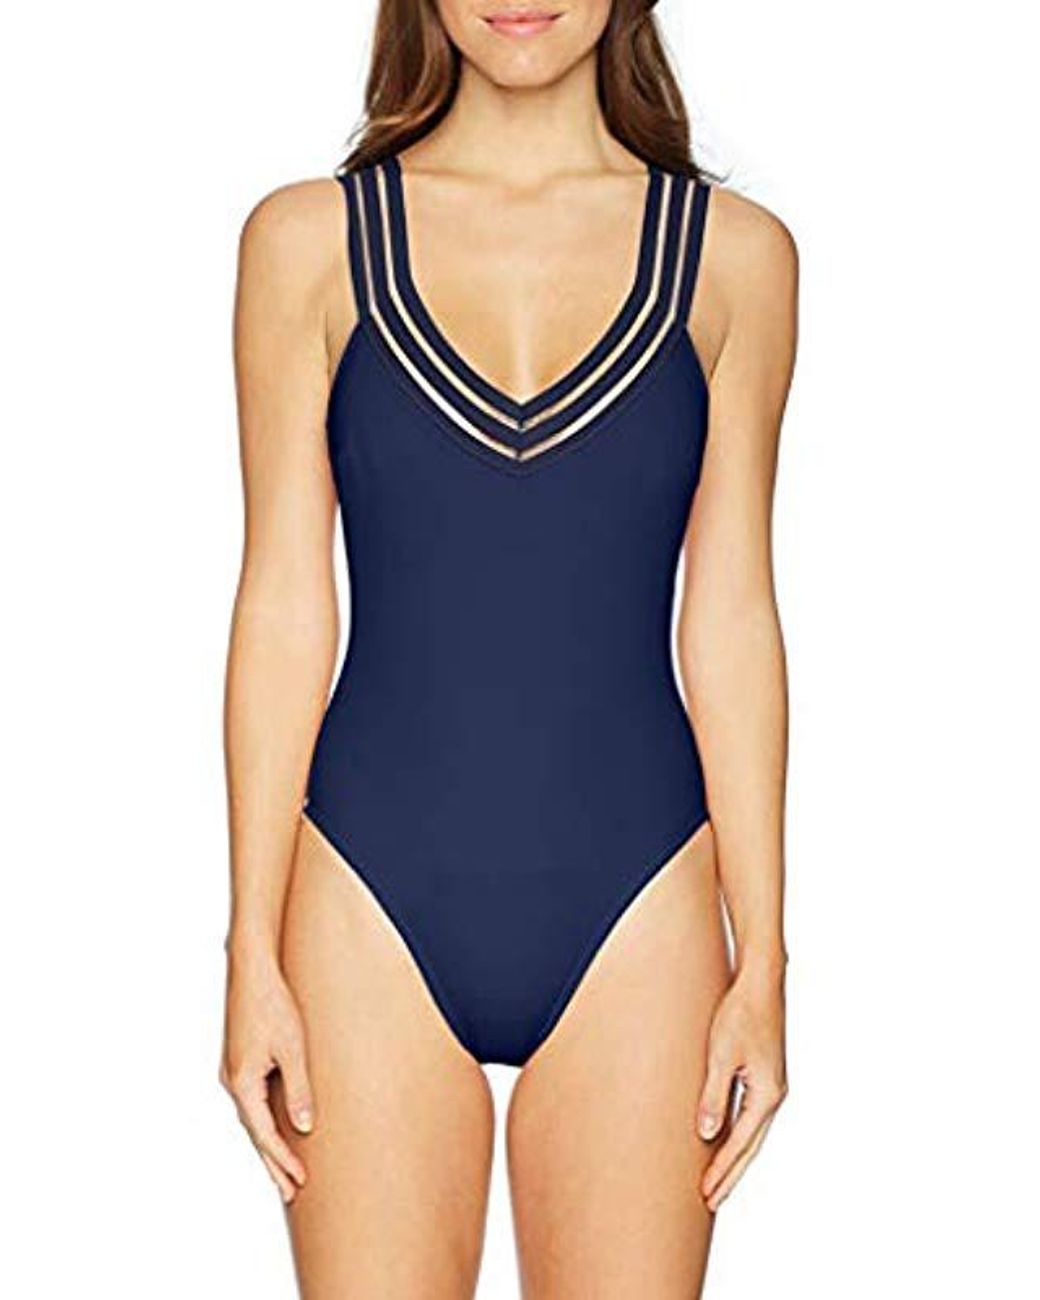 Kenneth Cole Reaction Swim Size Chart